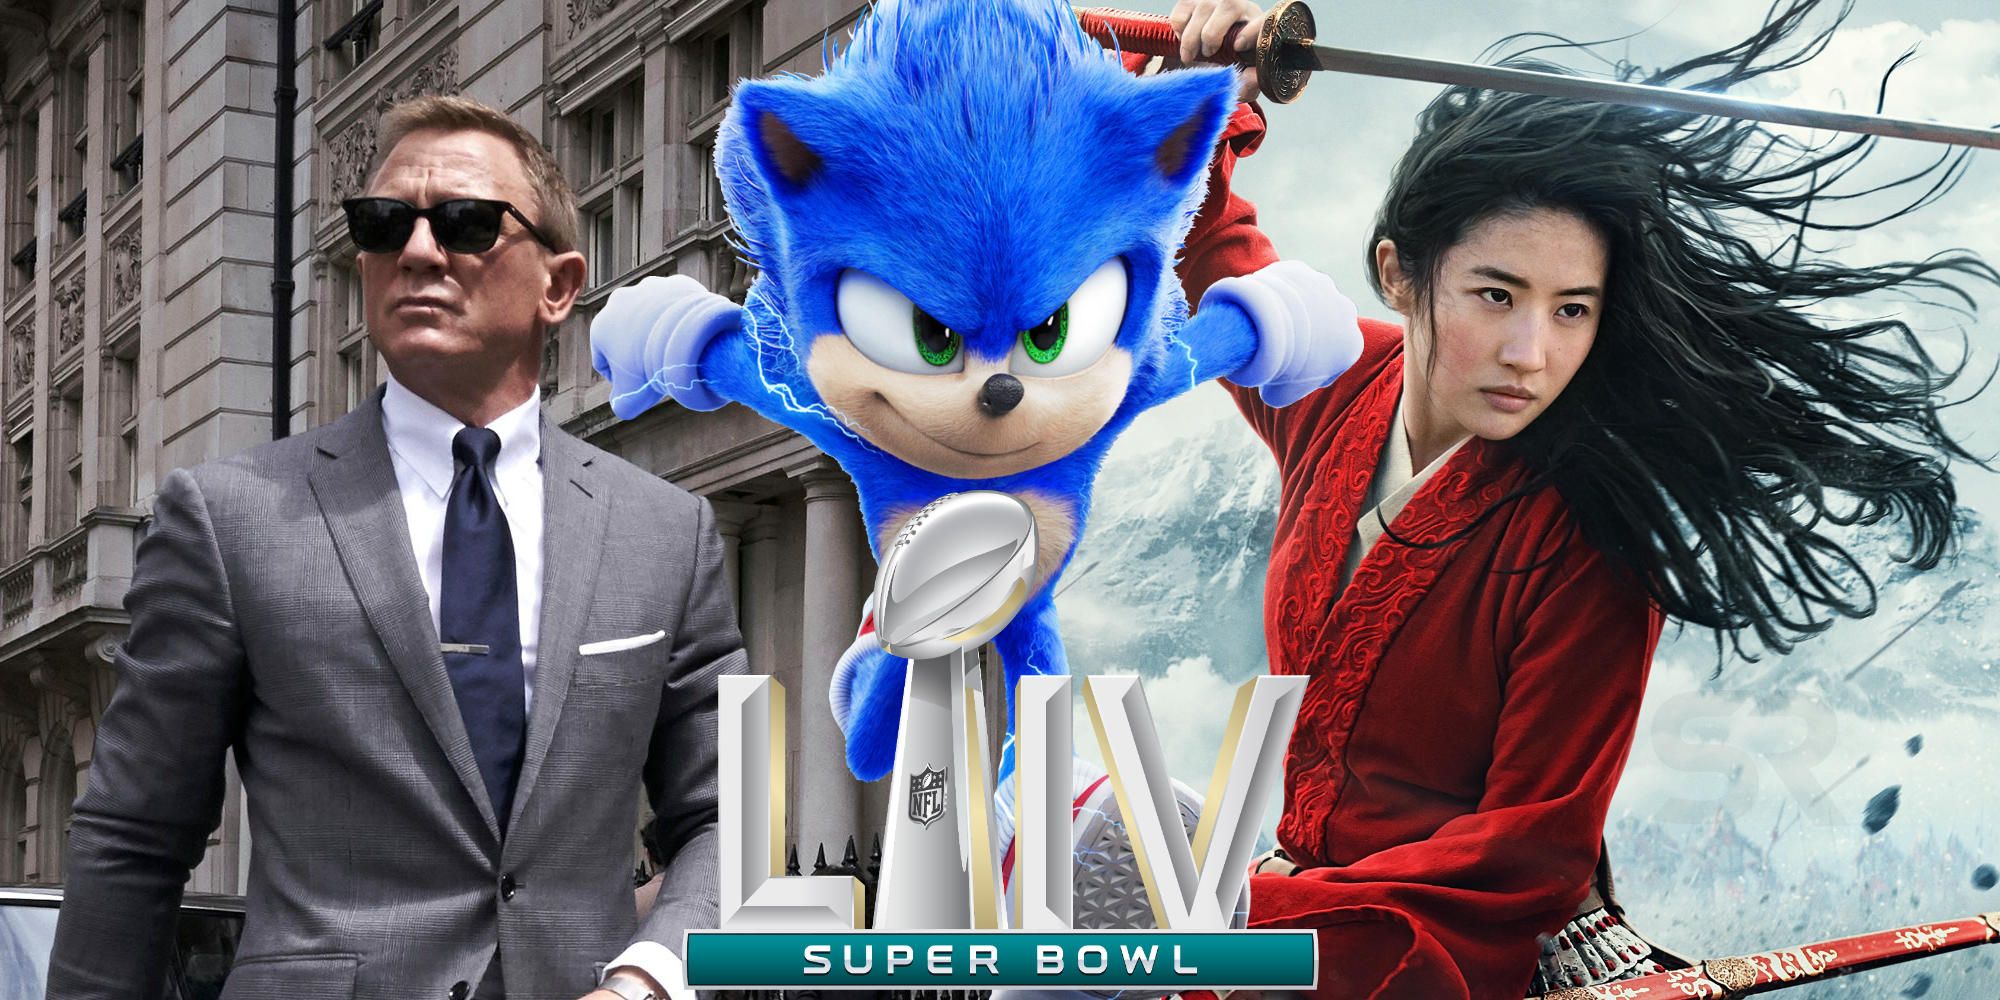 Super Bowl 2020 Movie & TV Trailers Prediction What Will Play During The Game